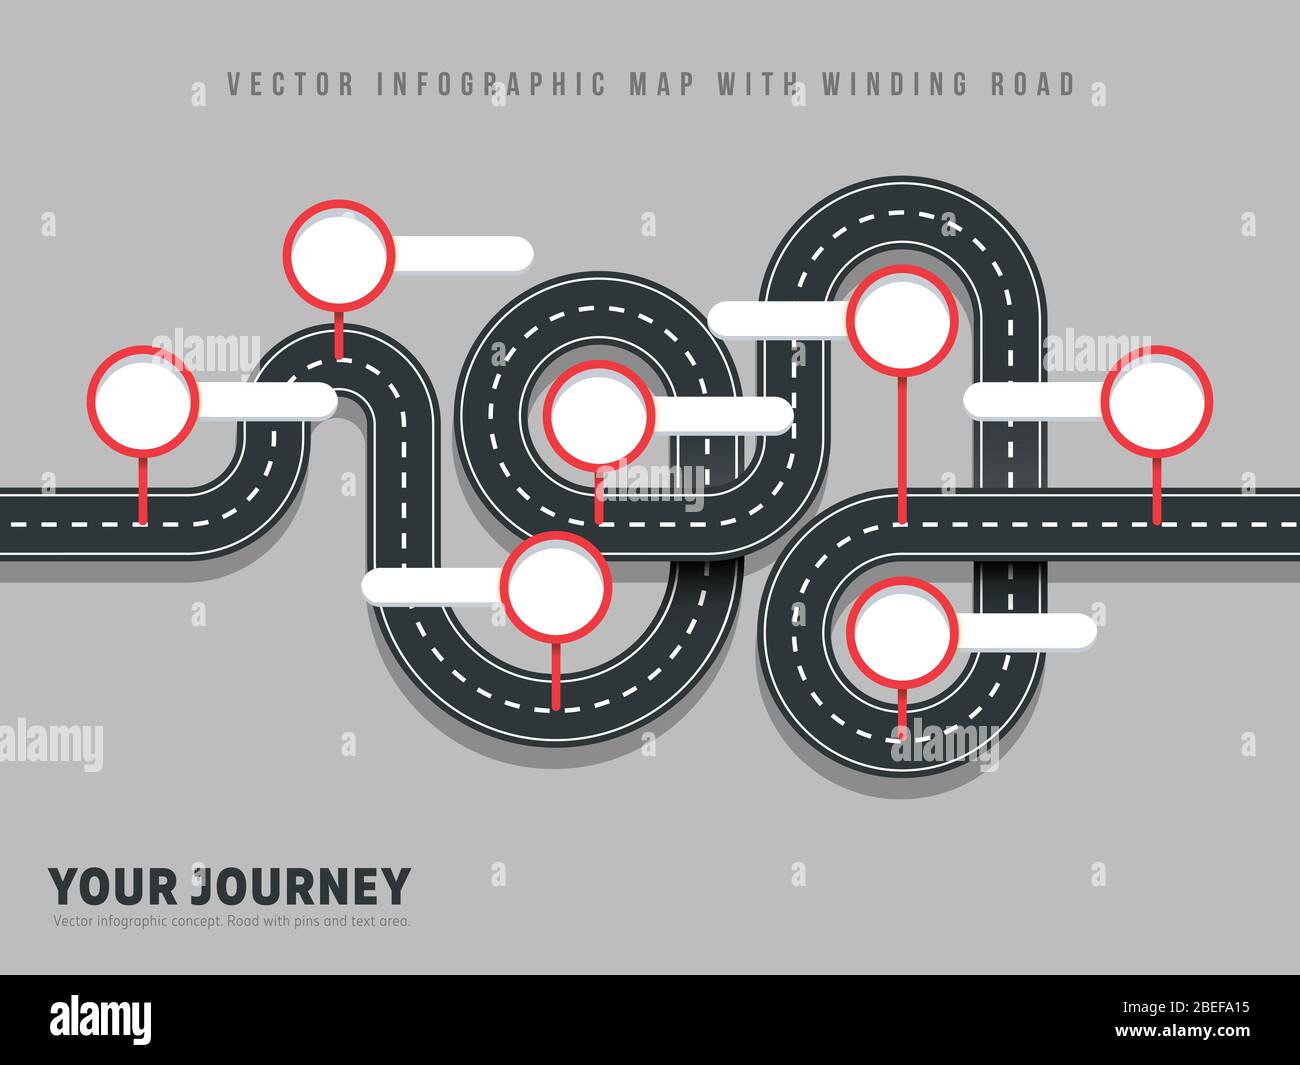 Navigation winding road vector way map infographic on grey background. Road street winding infographic, vector illustration Stock Vector